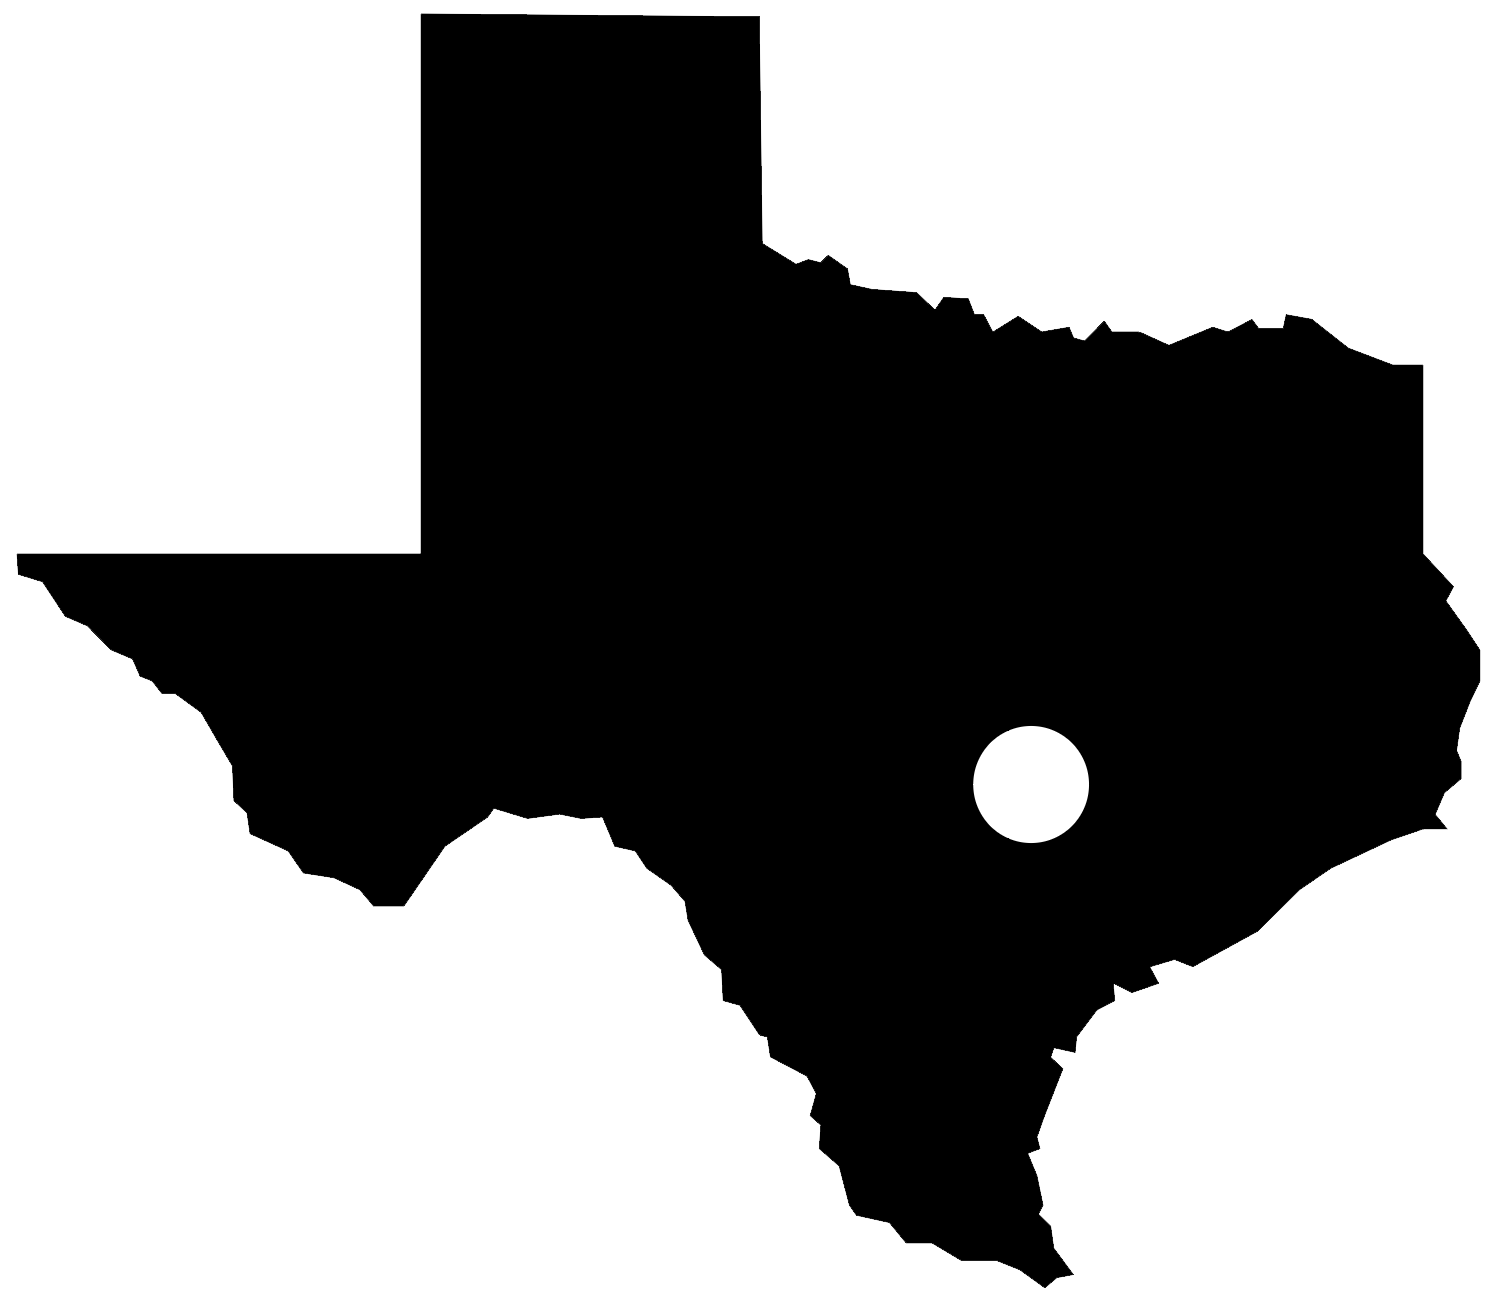 A small map showing the location of Bastrop